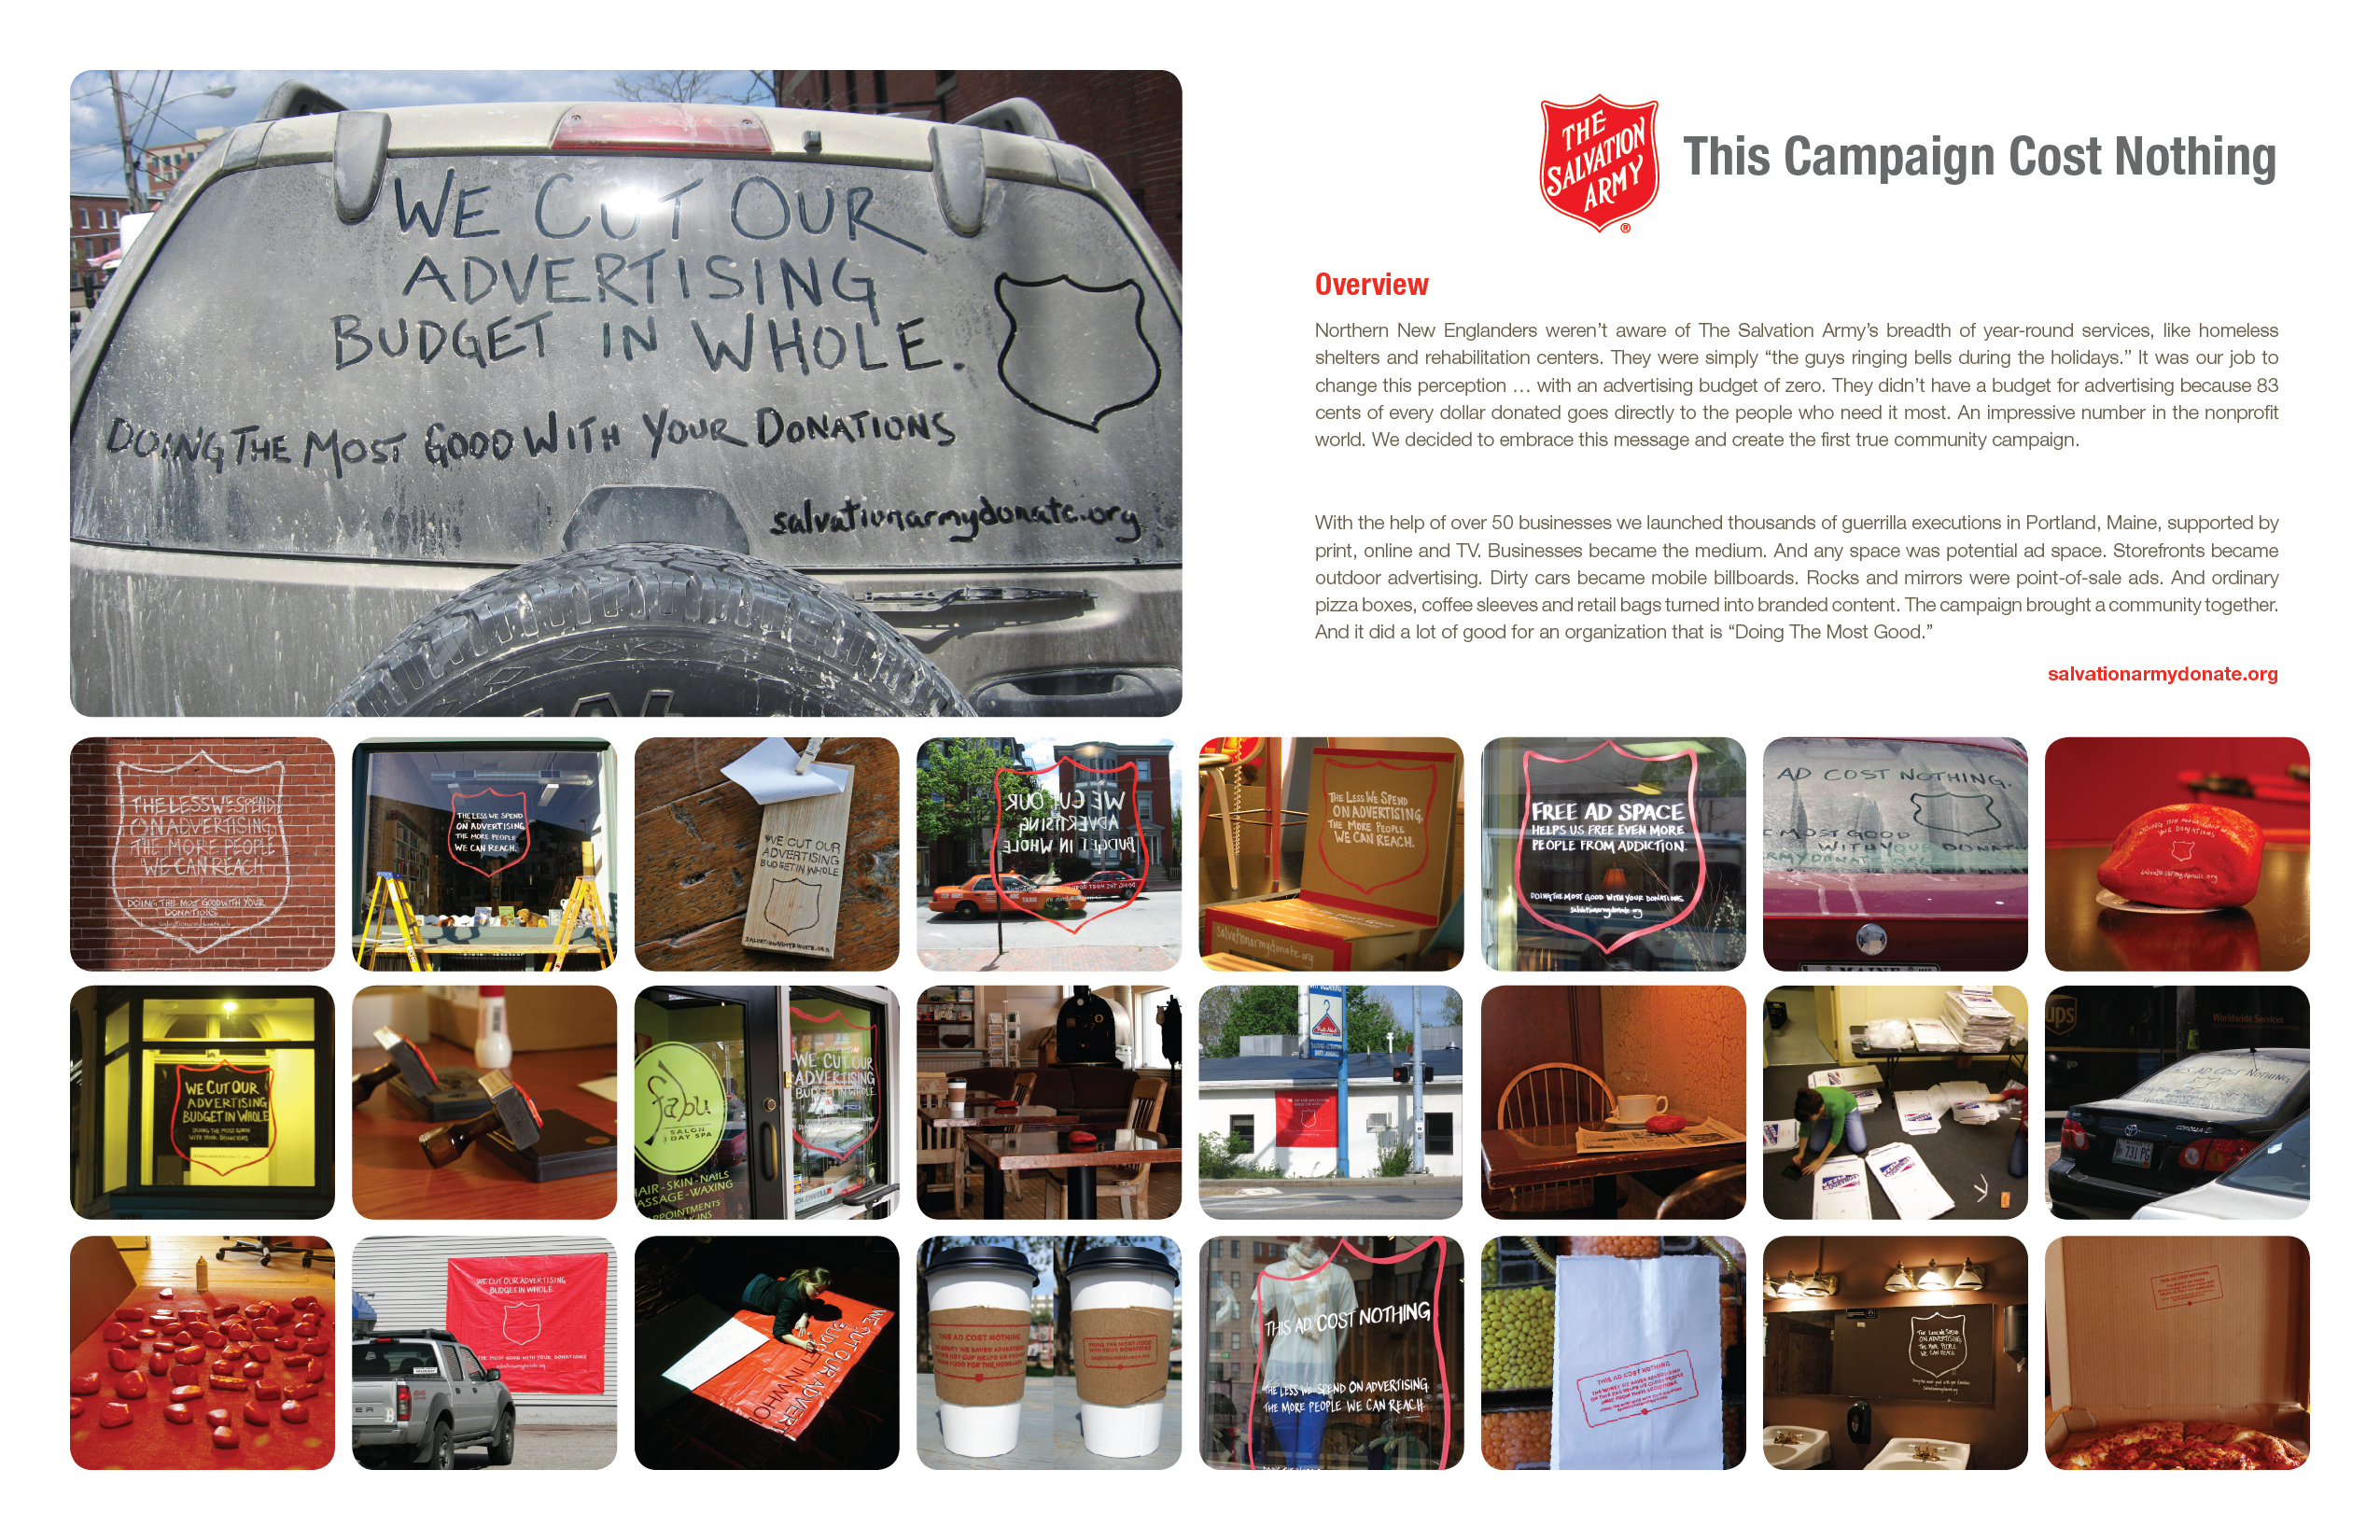 This Campaign Cost Nothing created by The VIA Group for The Salvation Army